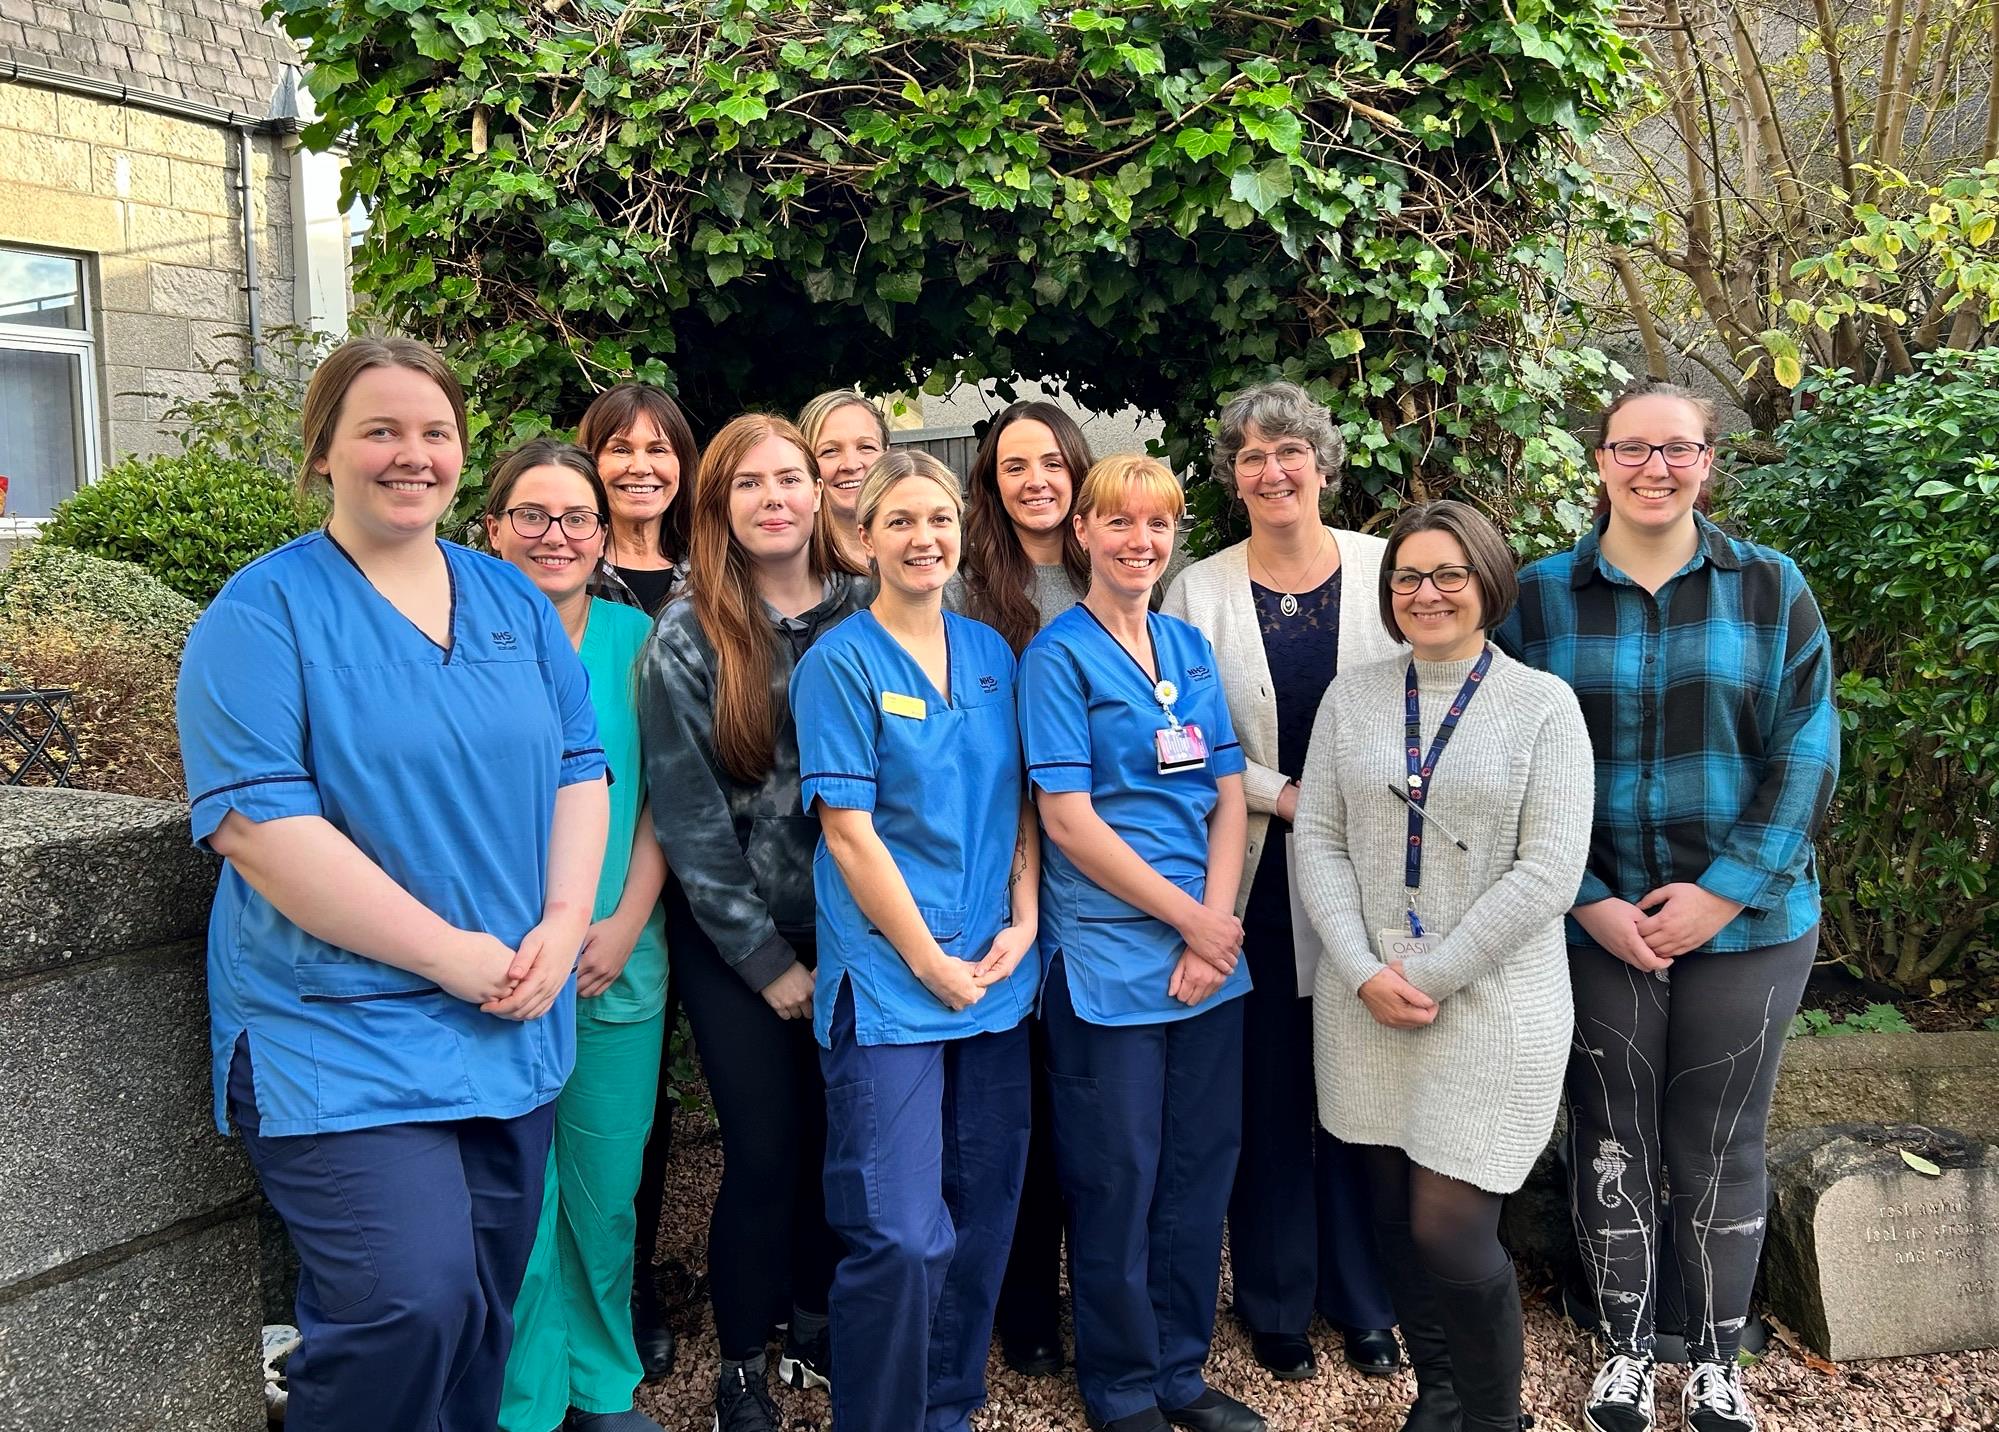 Photos capture members of the team from the Rubislaw Ward in their garden area at Aberdeen Maternity Hospital. While just a handful of team members are on shift at any one time, we were lucky to catch up with them following a training session.